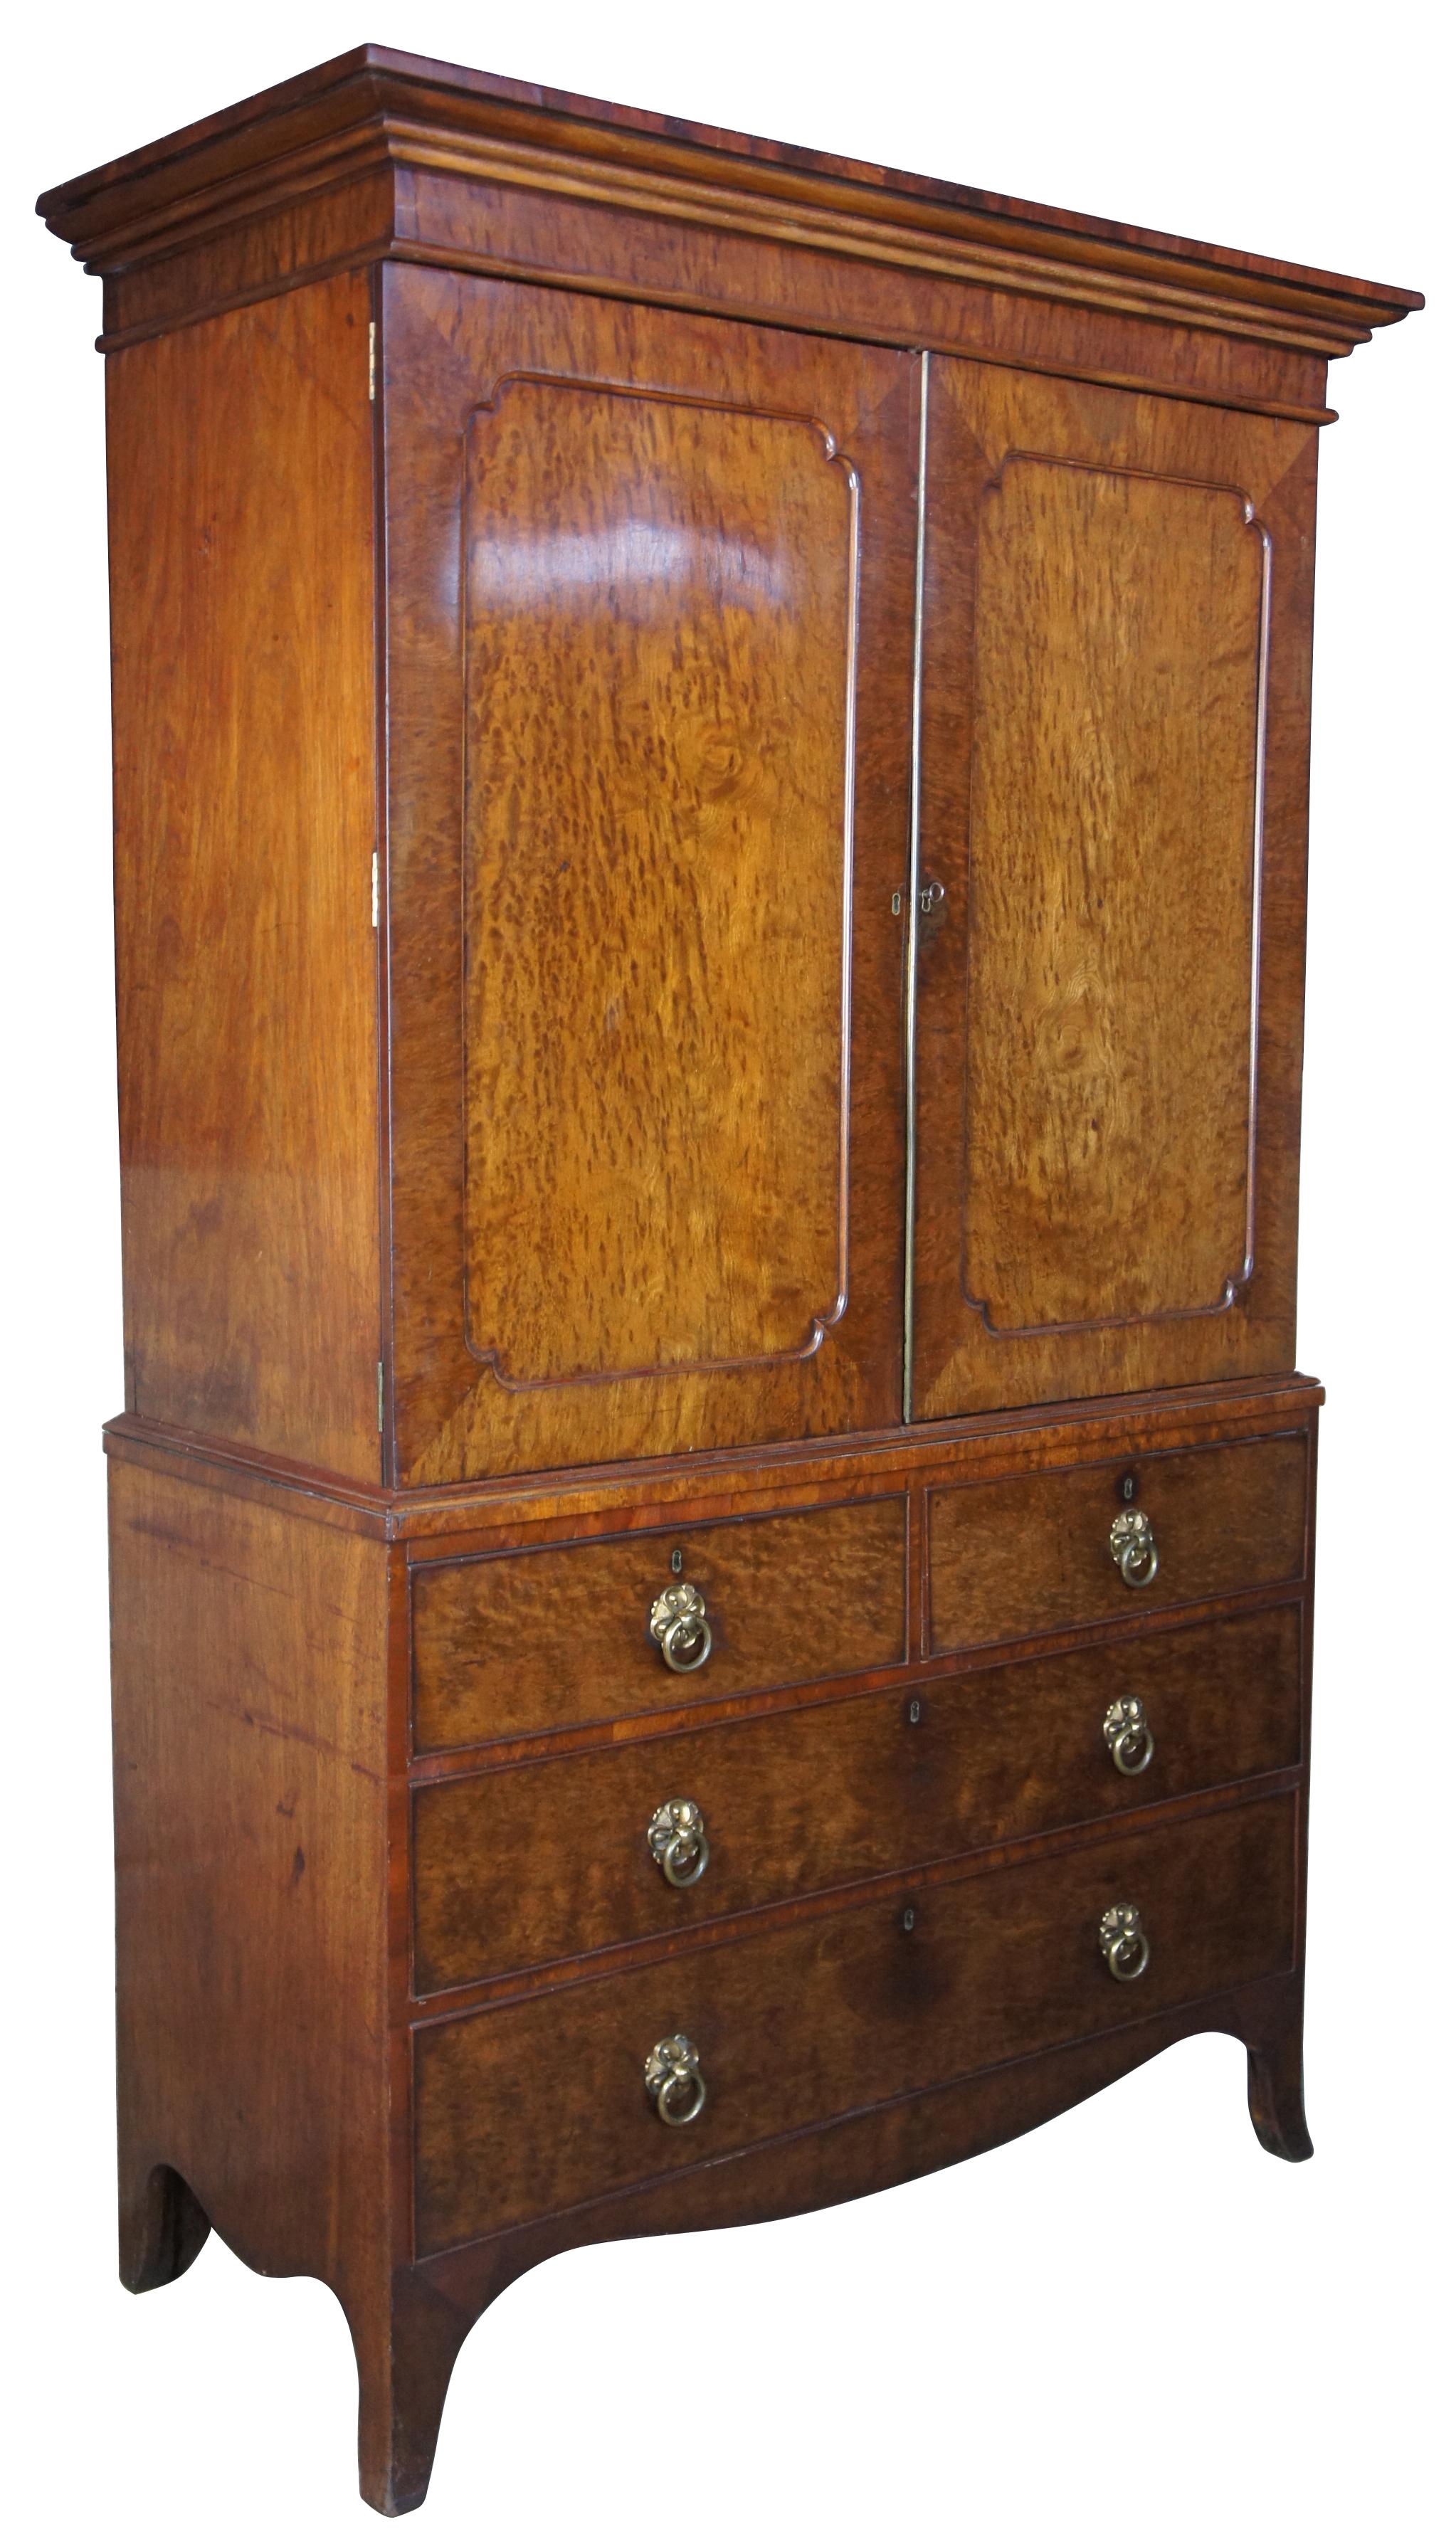 Very fine and impressive George III Period Linen Press, c. 1790s. A rectangular form made from 